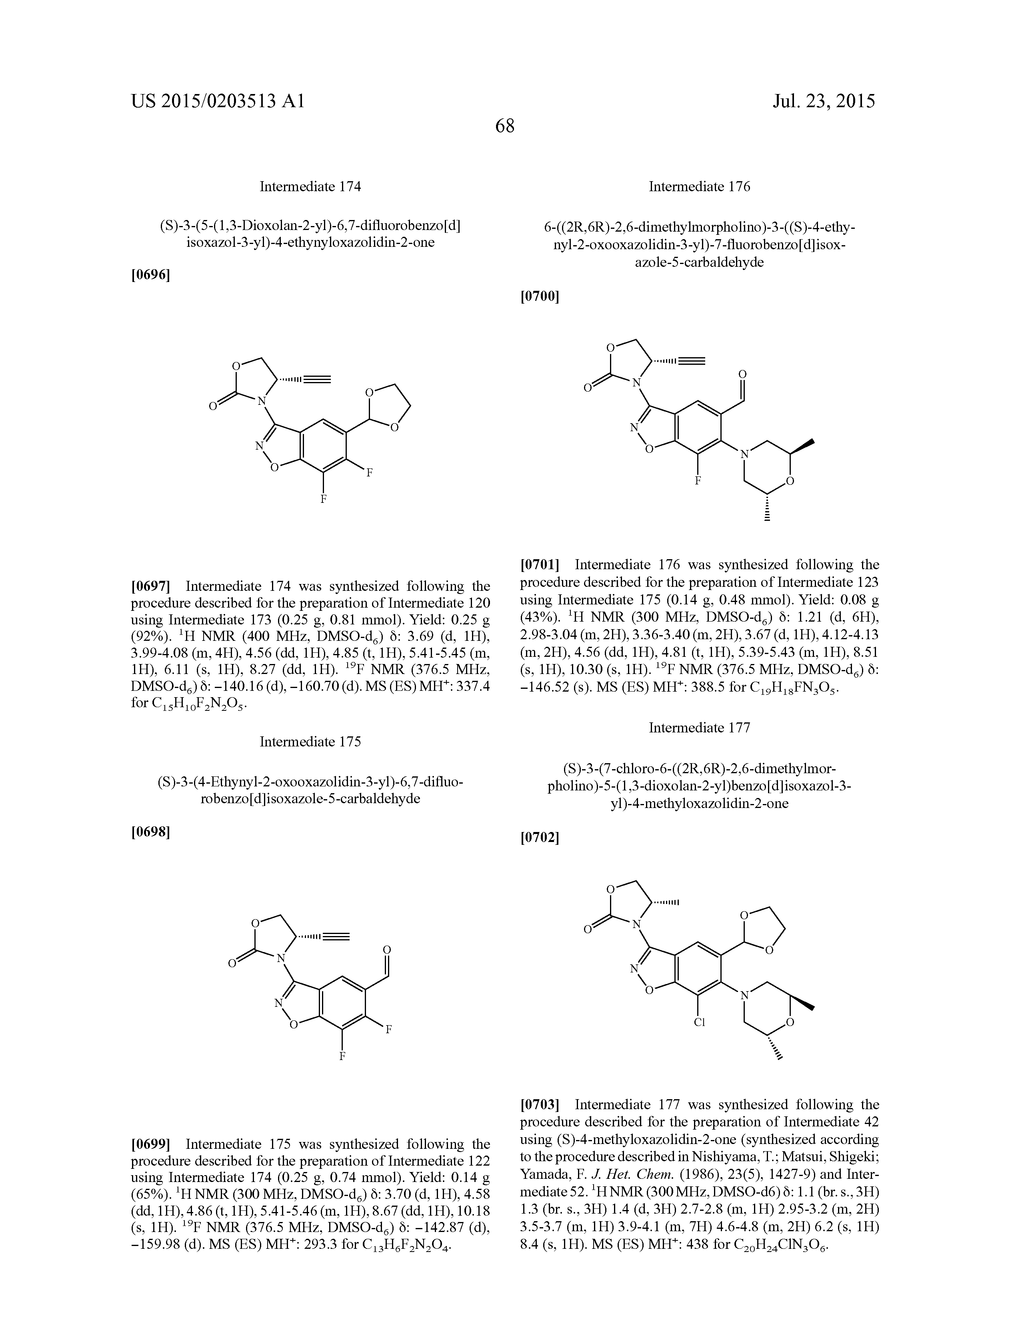 COMPOUNDS AND METHODS FOR TREATING BACTERIAL INFECTIONS - diagram, schematic, and image 71